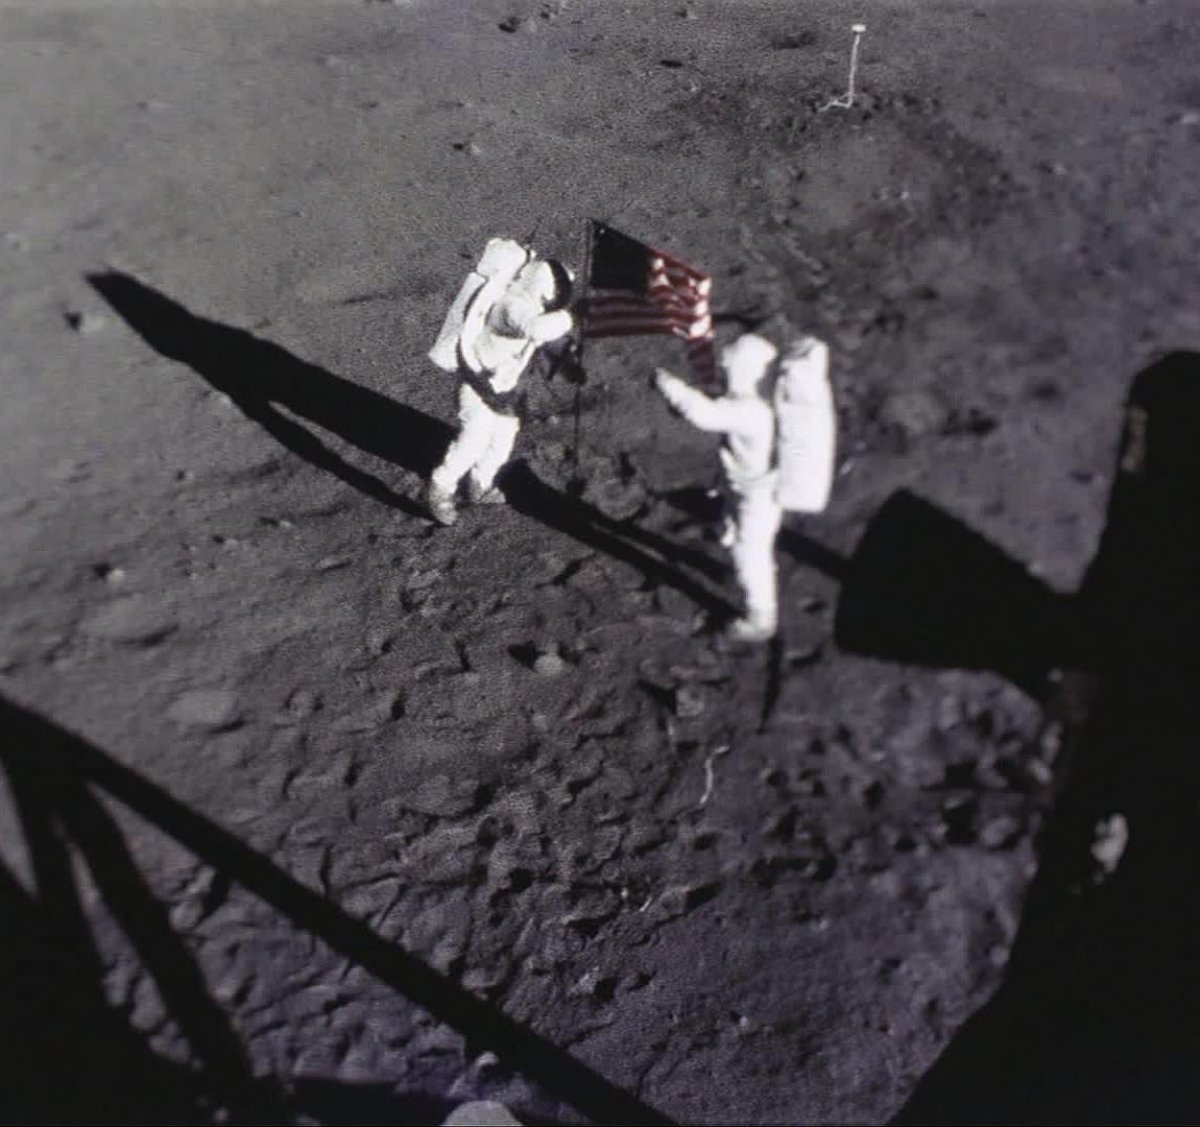 PHOTO: Astronauts Neil Armstrong and Buzz Aldrin place the American flag on the Moon, July 20, 1969.